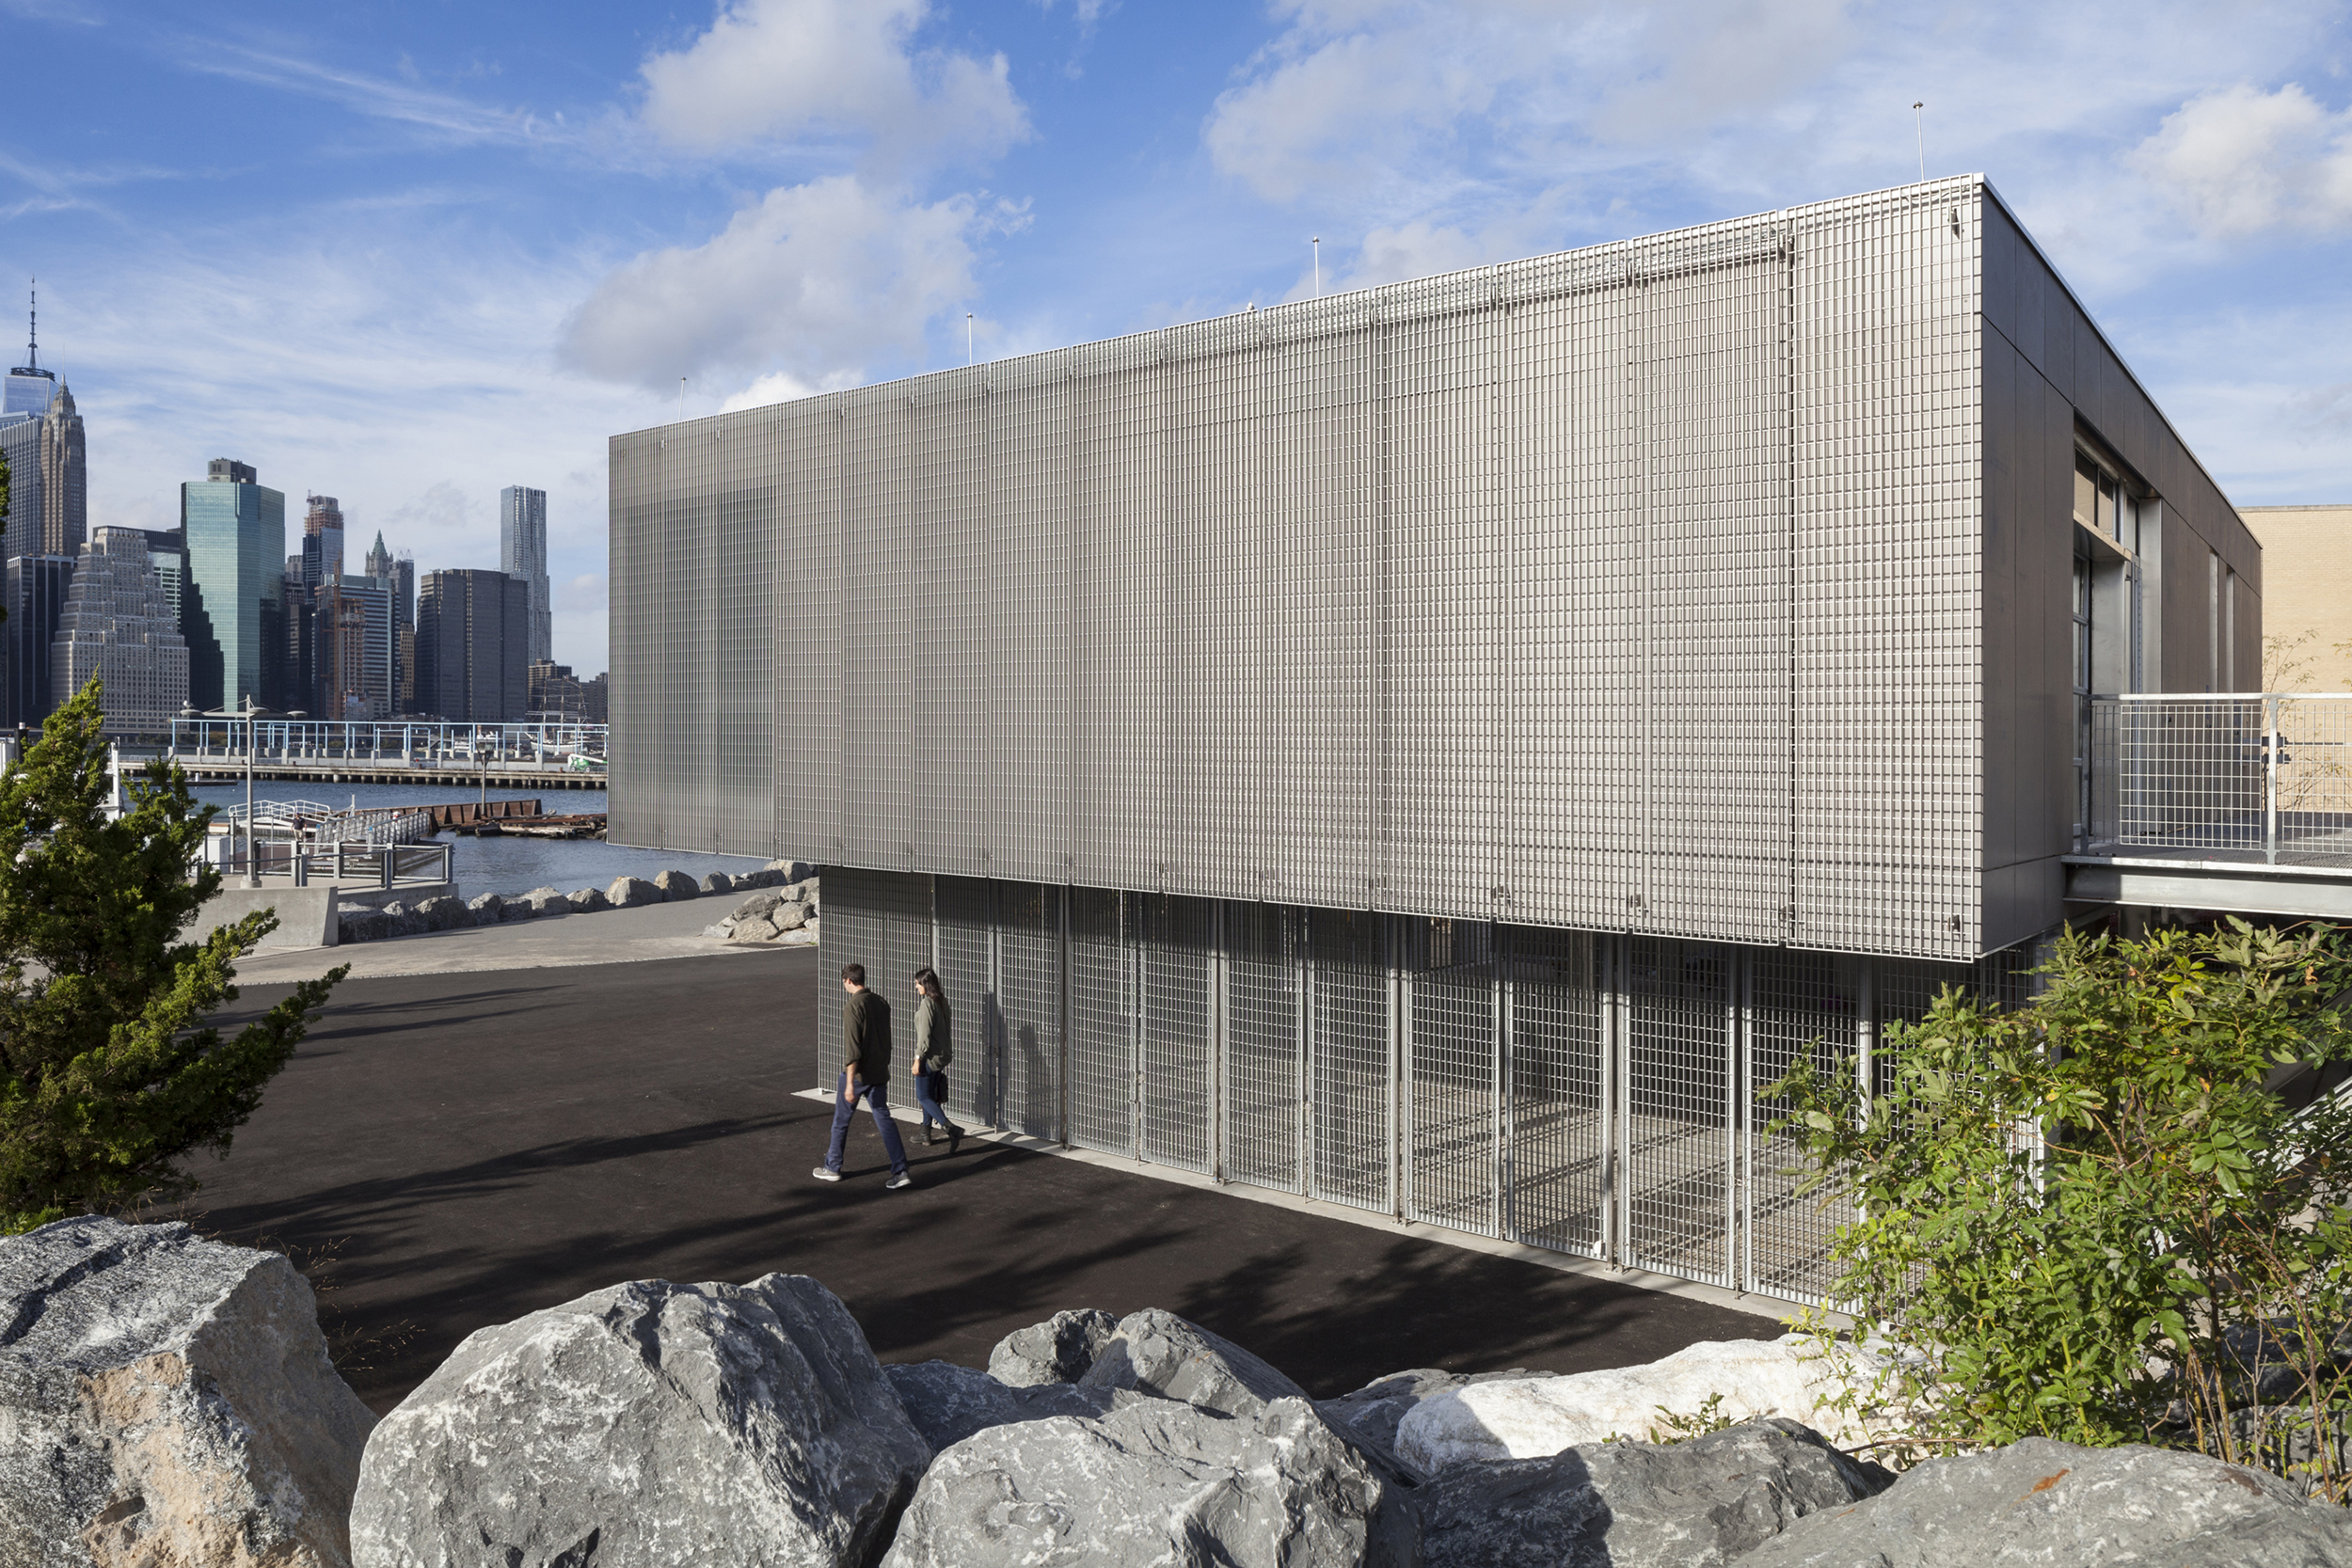 Boathouse in Brooklyn Bridge Park, Location: Brooklyn NY, Architect: Murphy Architecture Research Office